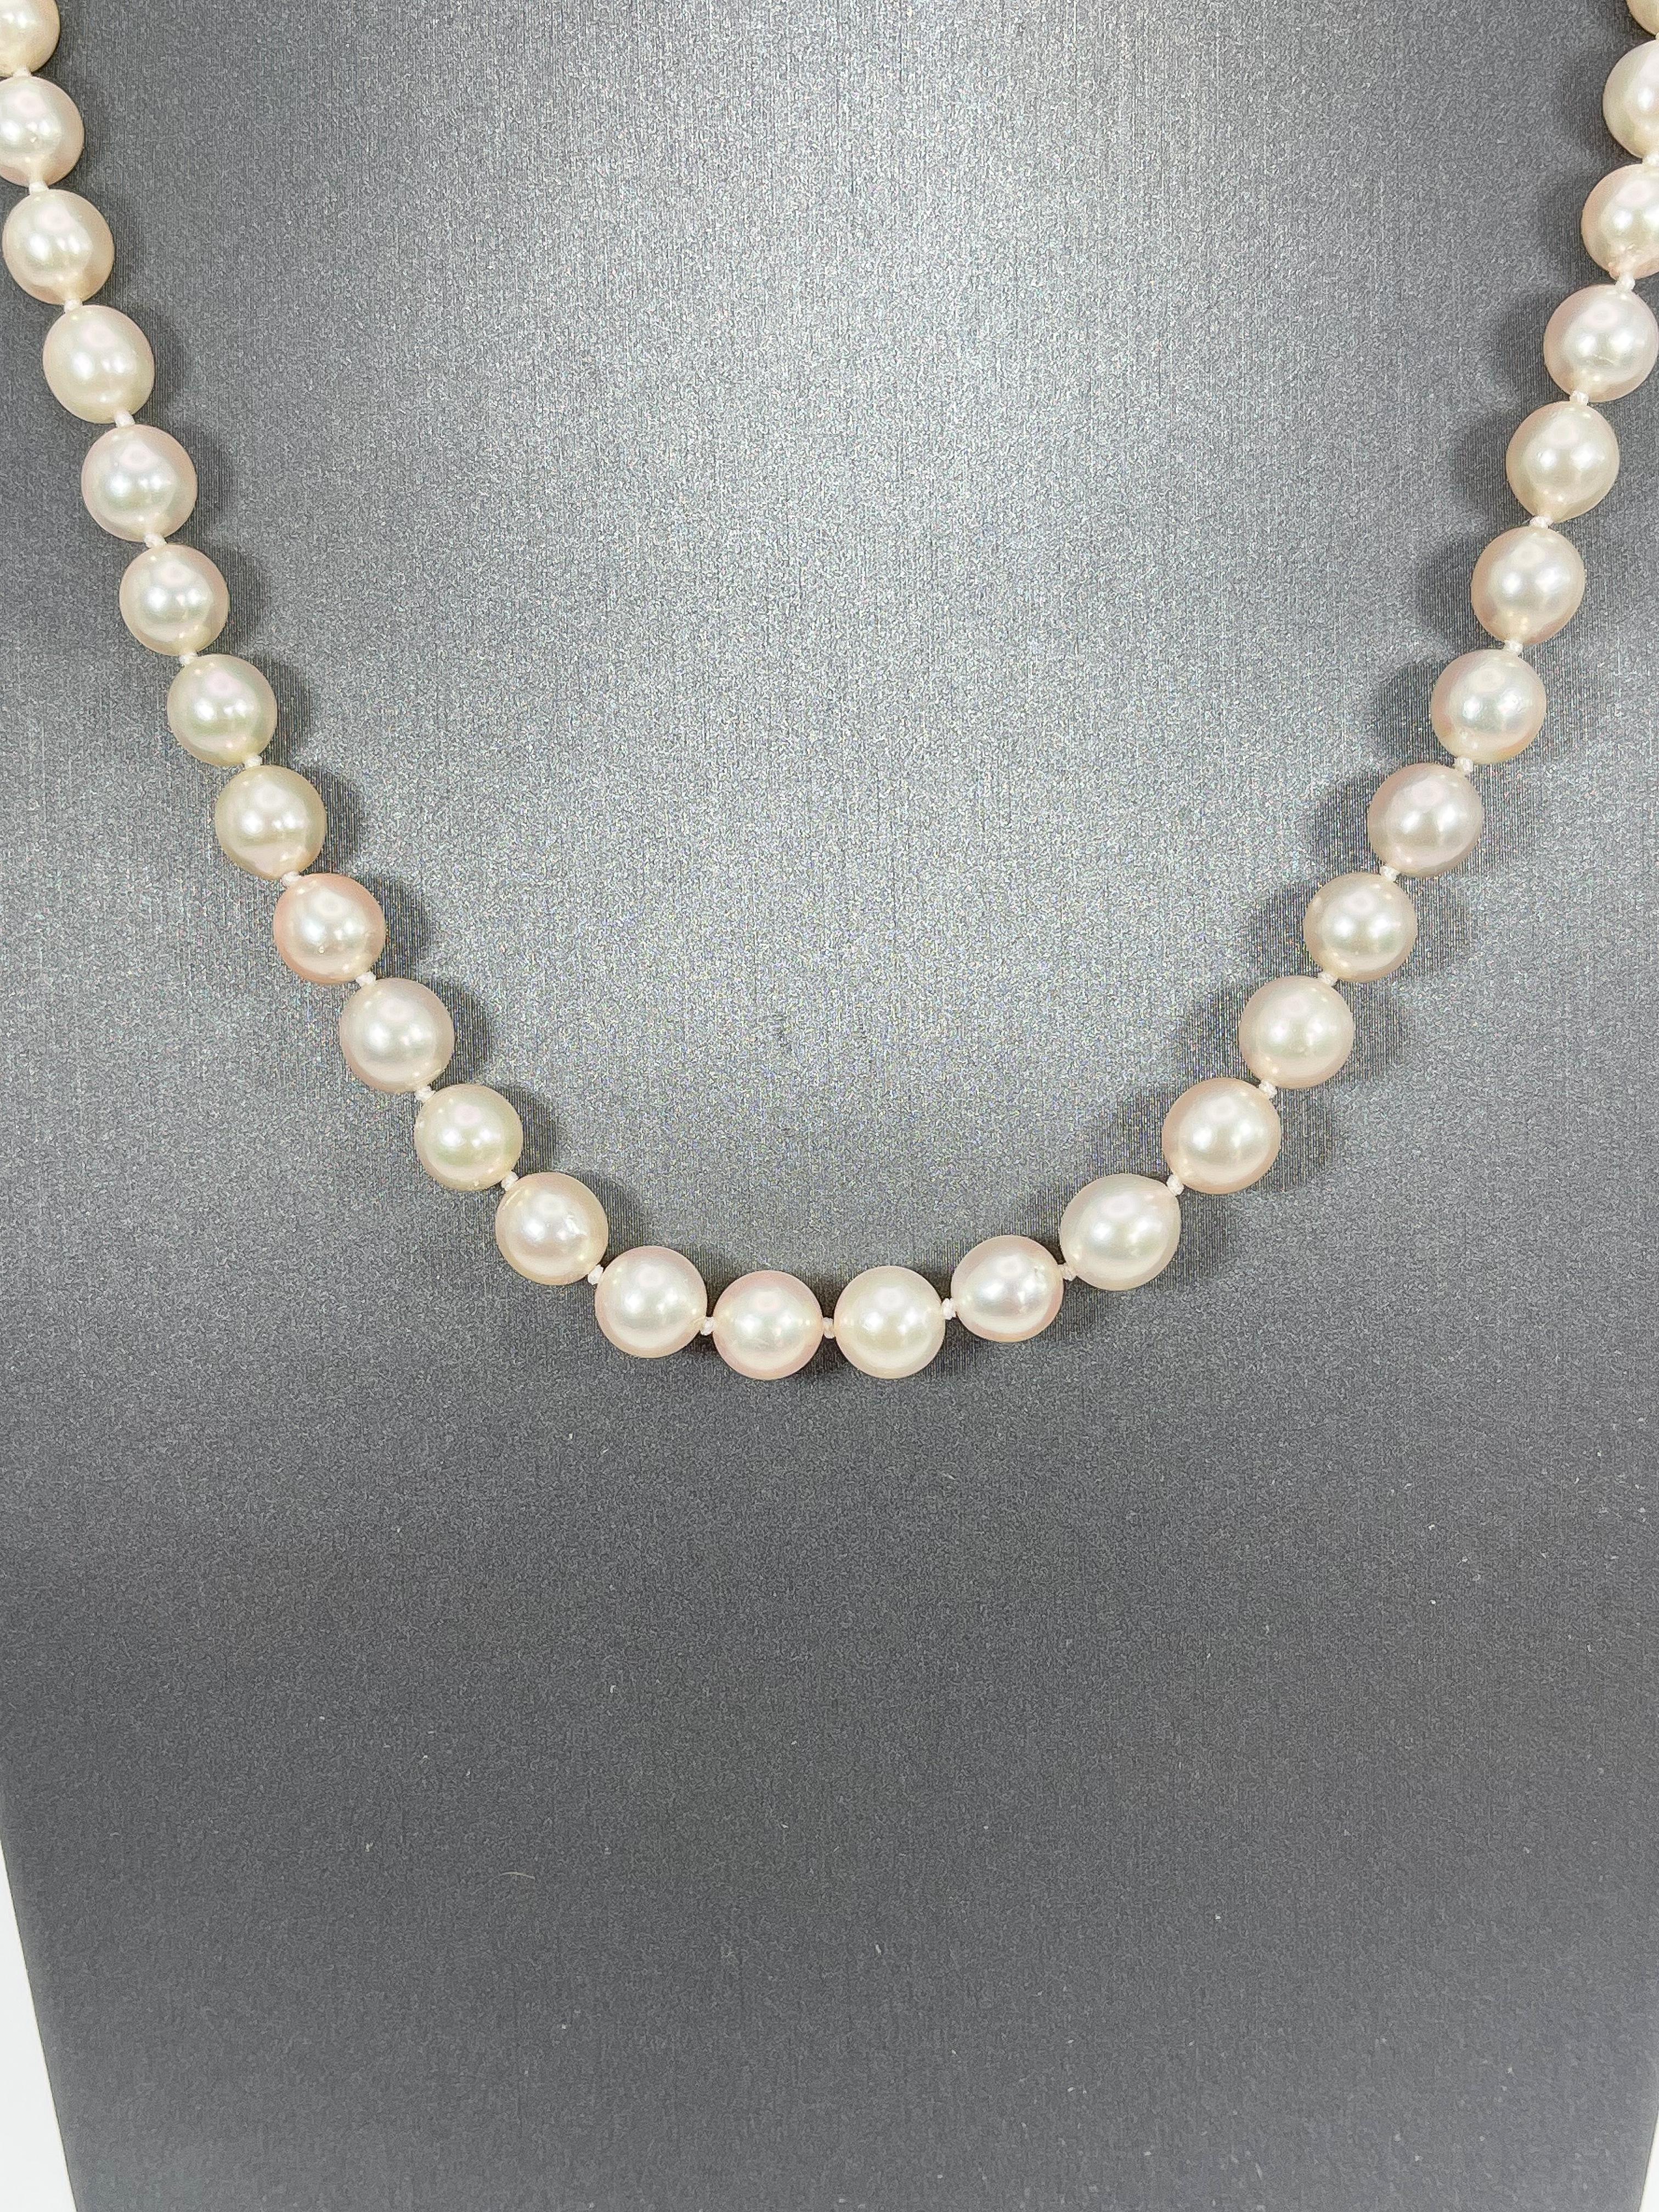 Bead White Pearl Strand Necklace with Platinum Diamond Pearl Clasp For Sale